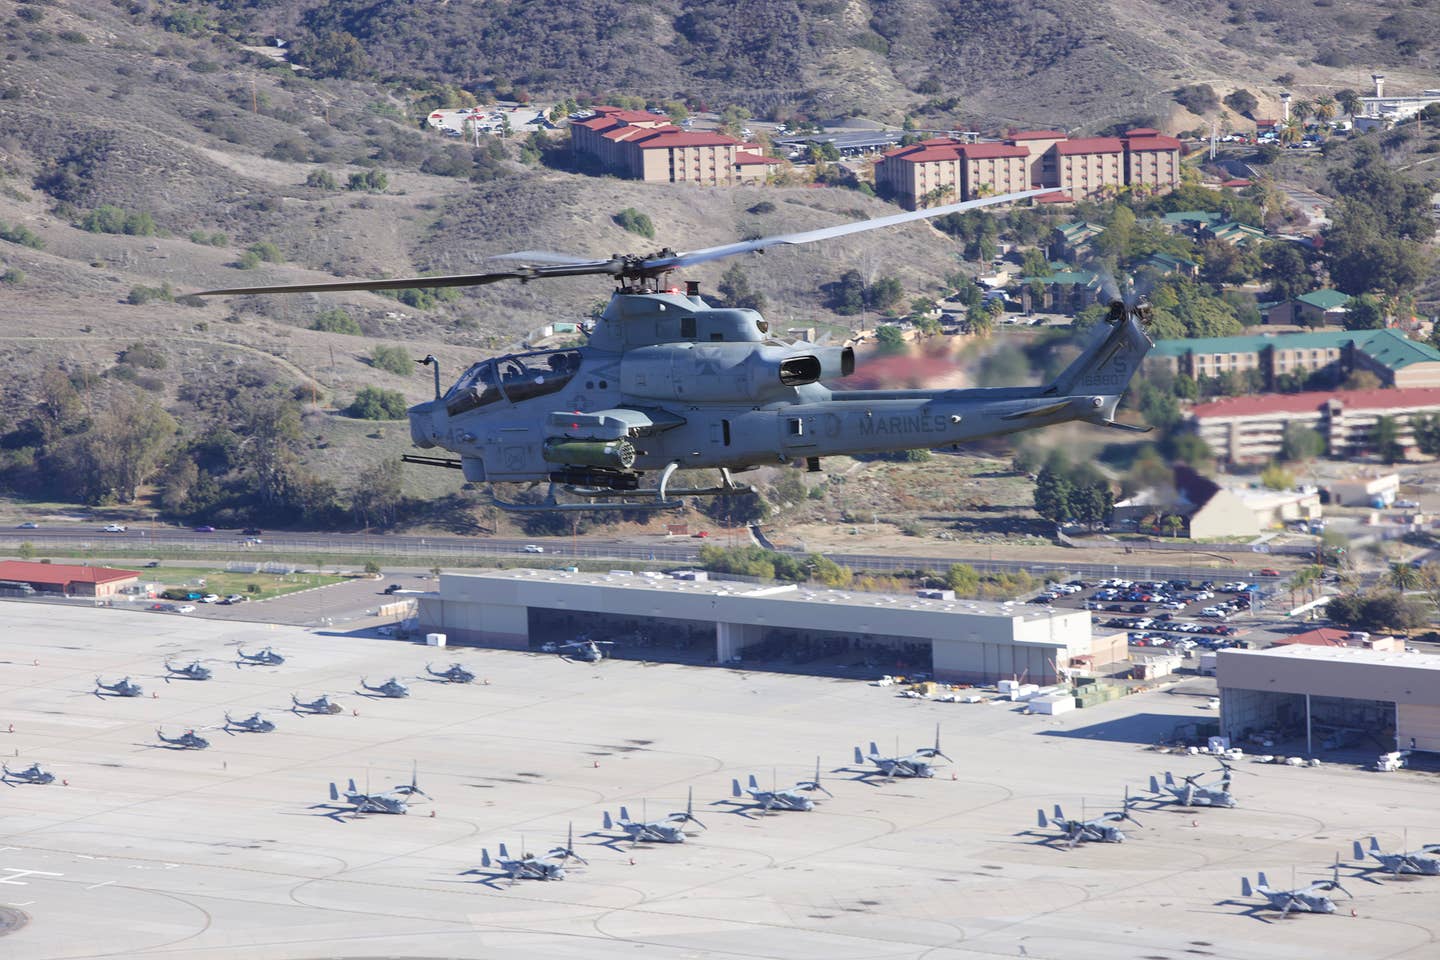 An AH-1Z flies over the flightline at Camp Pendleton. (Author)